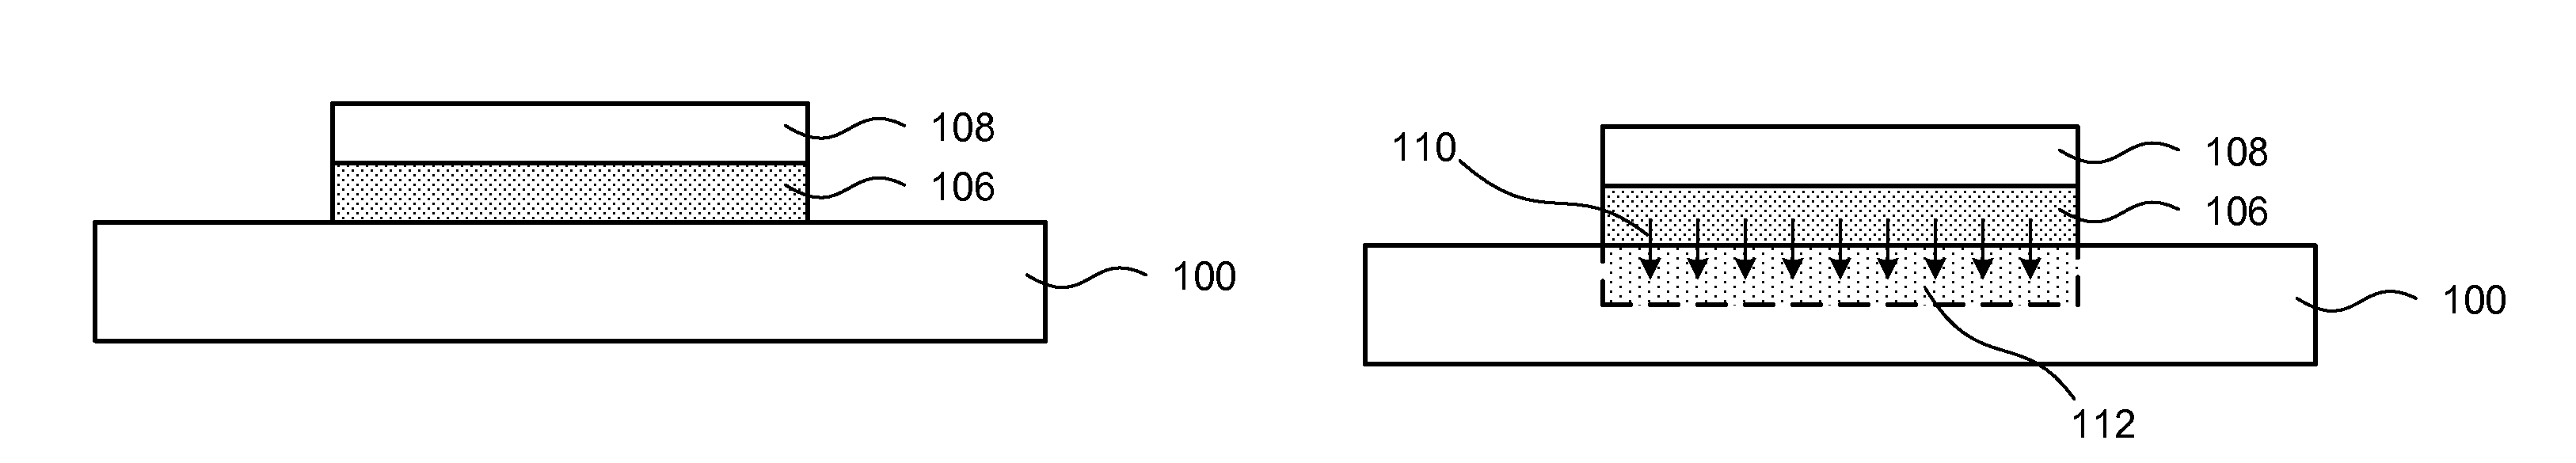 Method for forming ultra-shallow boron doping regions by solid phase diffusion